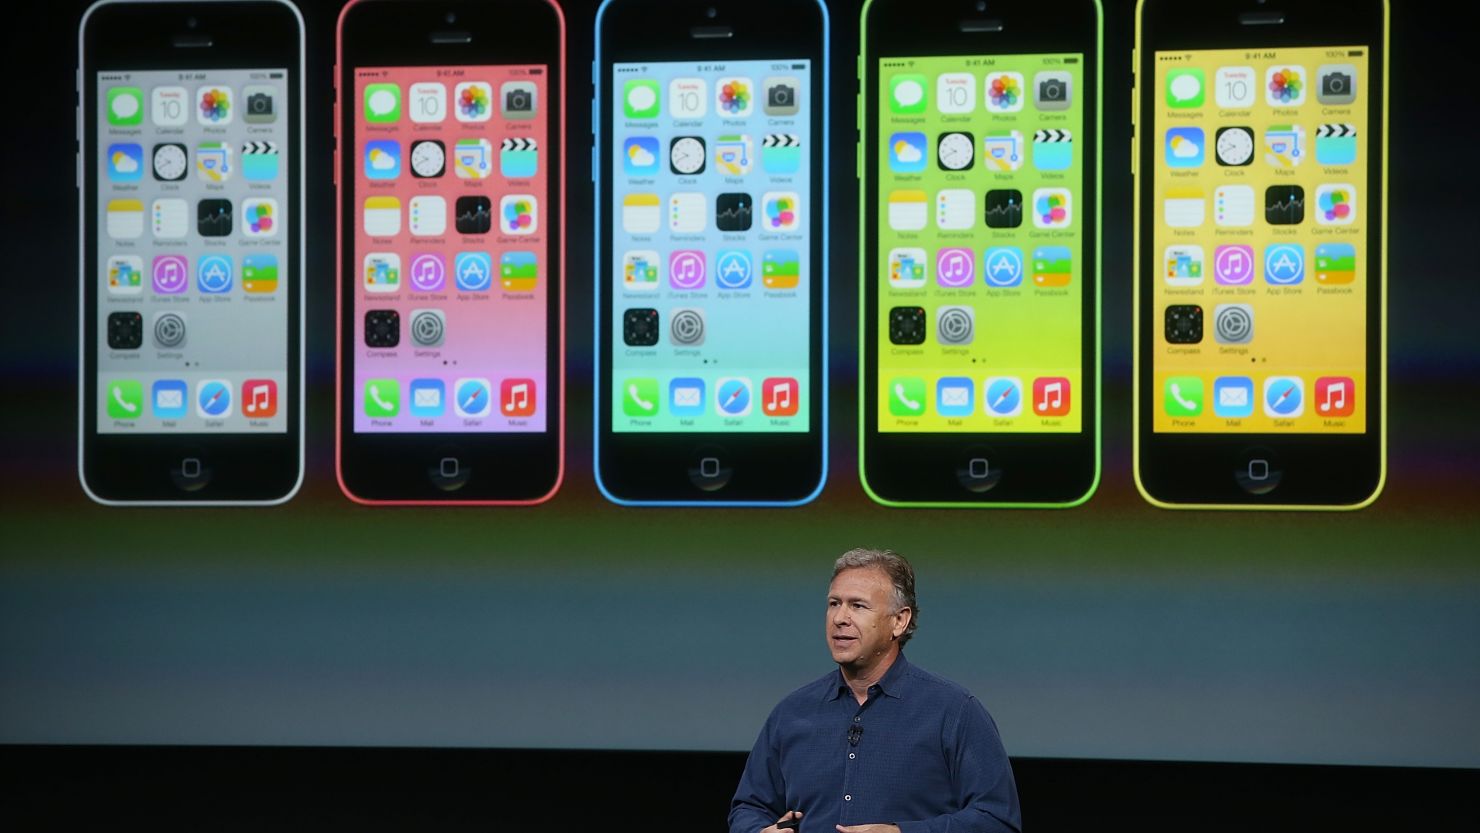 Phil Schiller, Apple senior vice president of worldwide marketing, touts the new iPhone 5C last week at Apple headquarters.